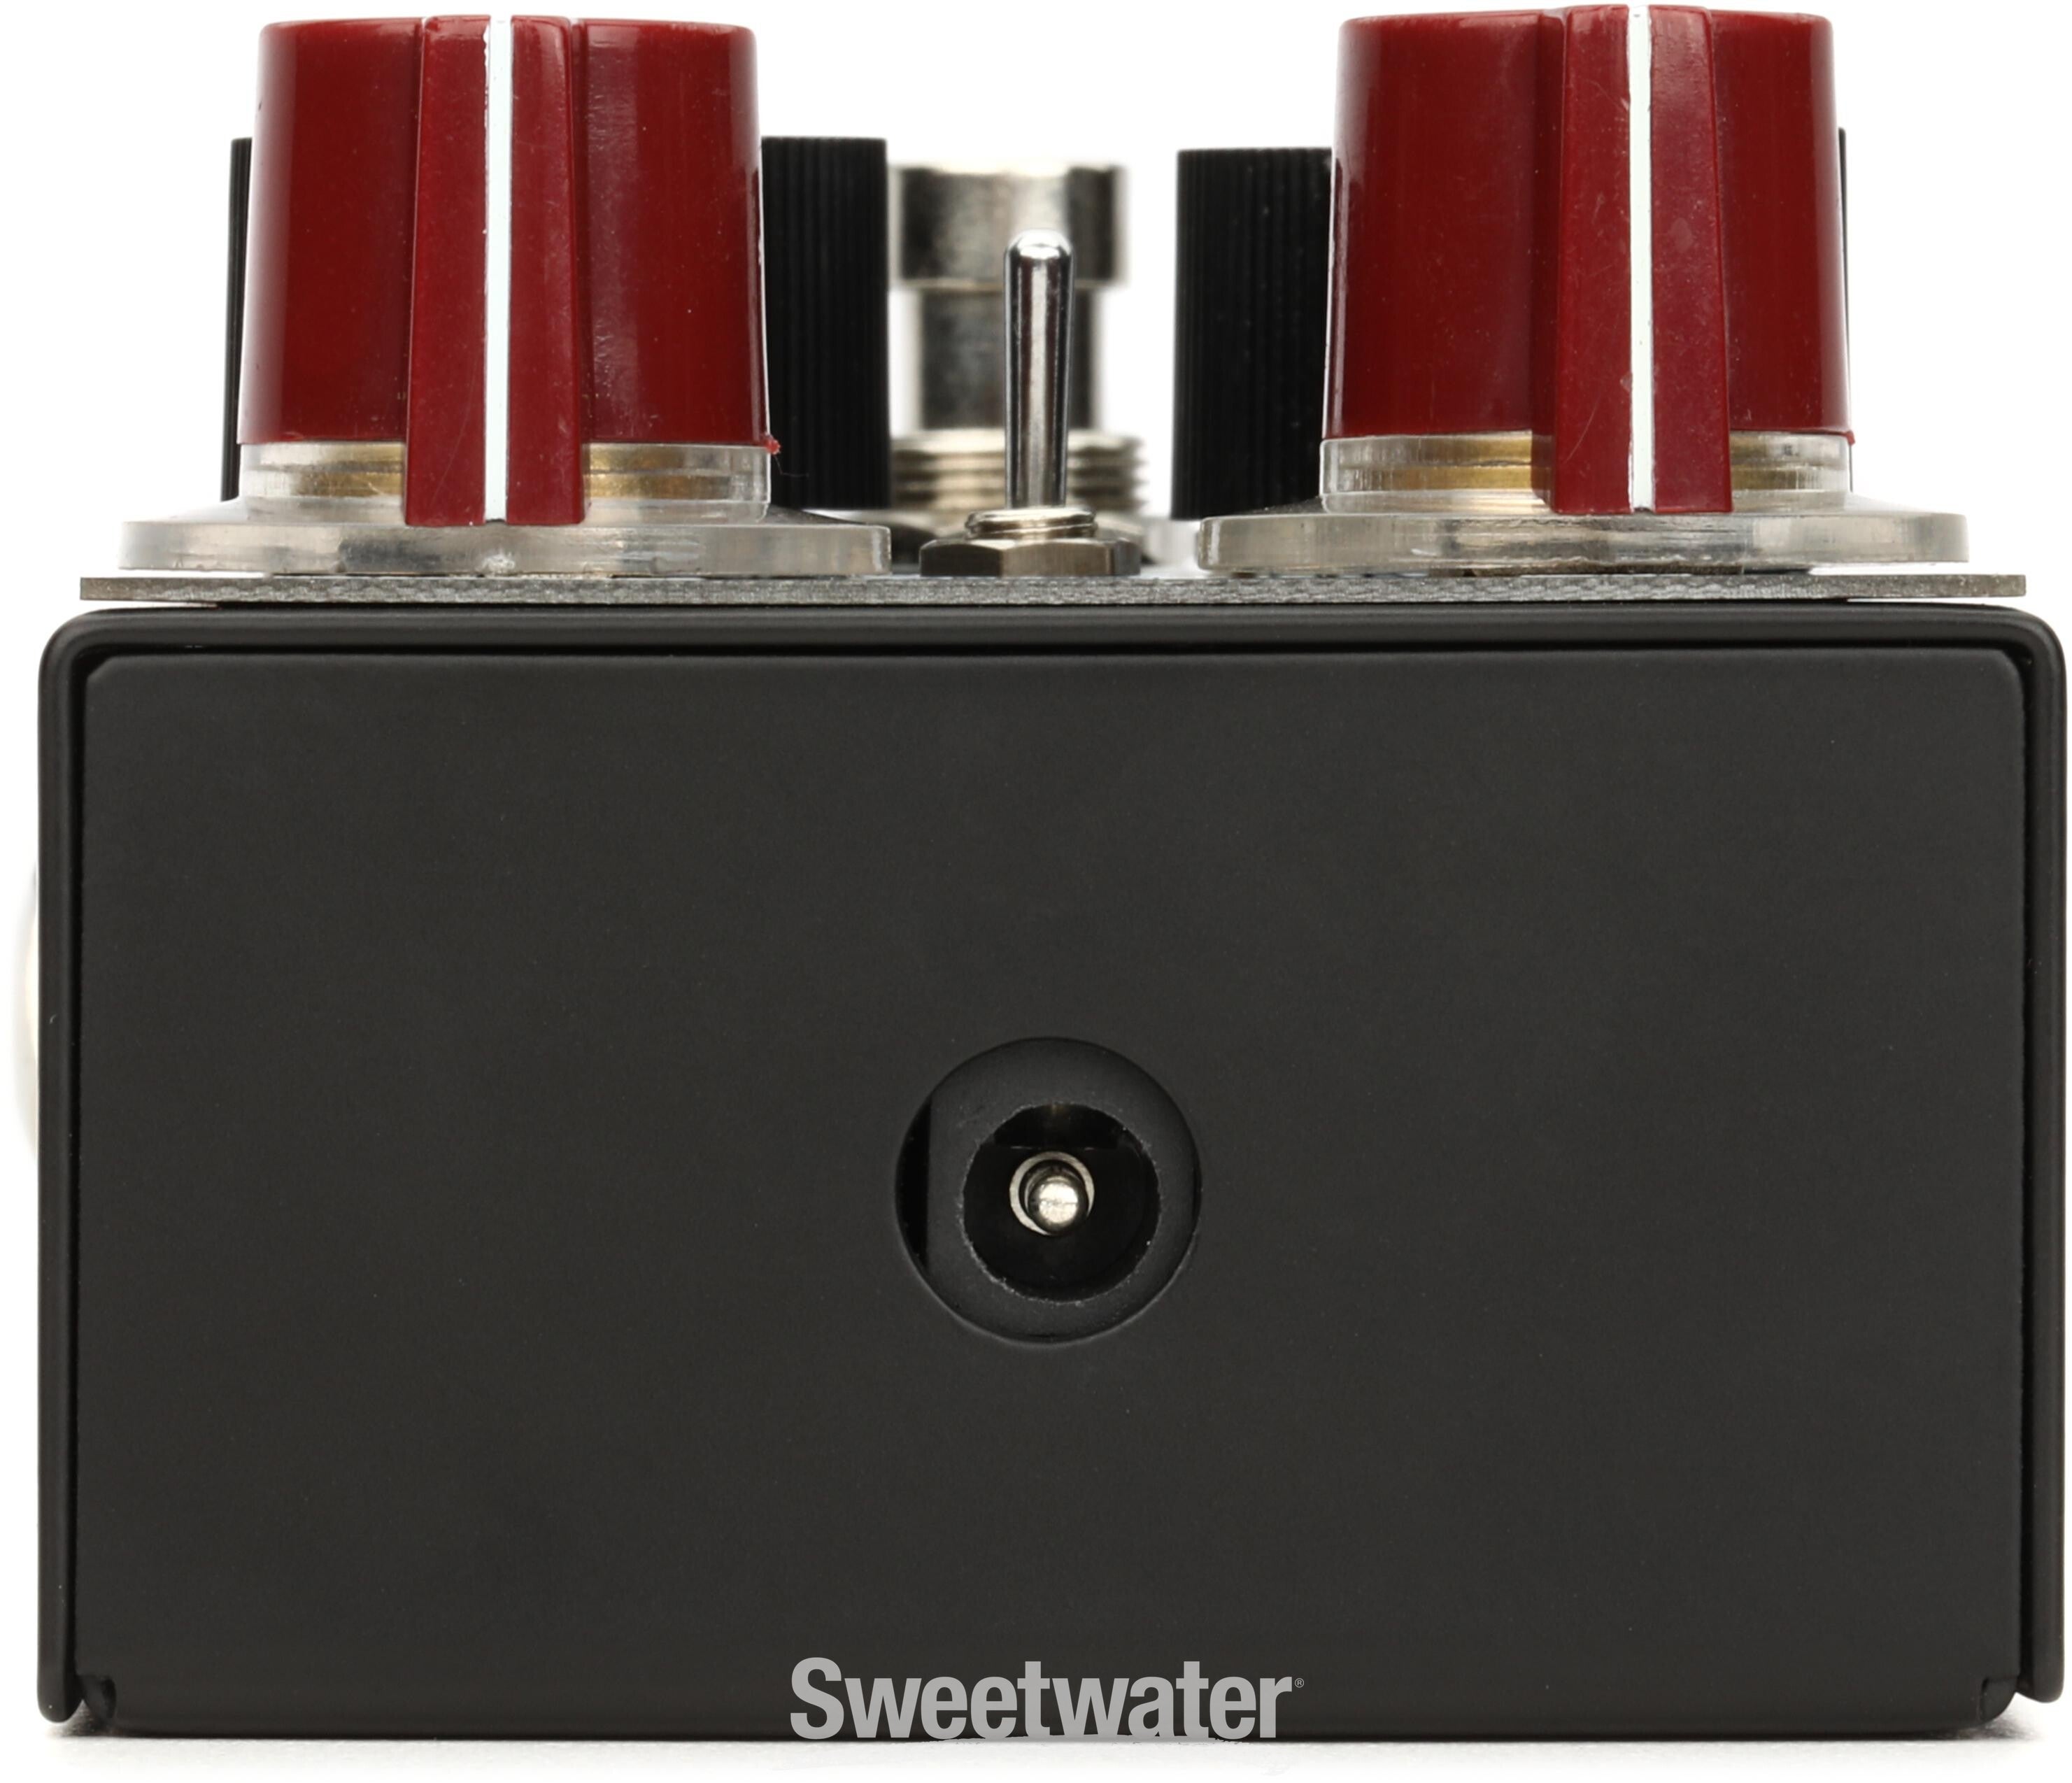 DSM Humboldt Electronics ClearComp Compressor Pedal | Sweetwater